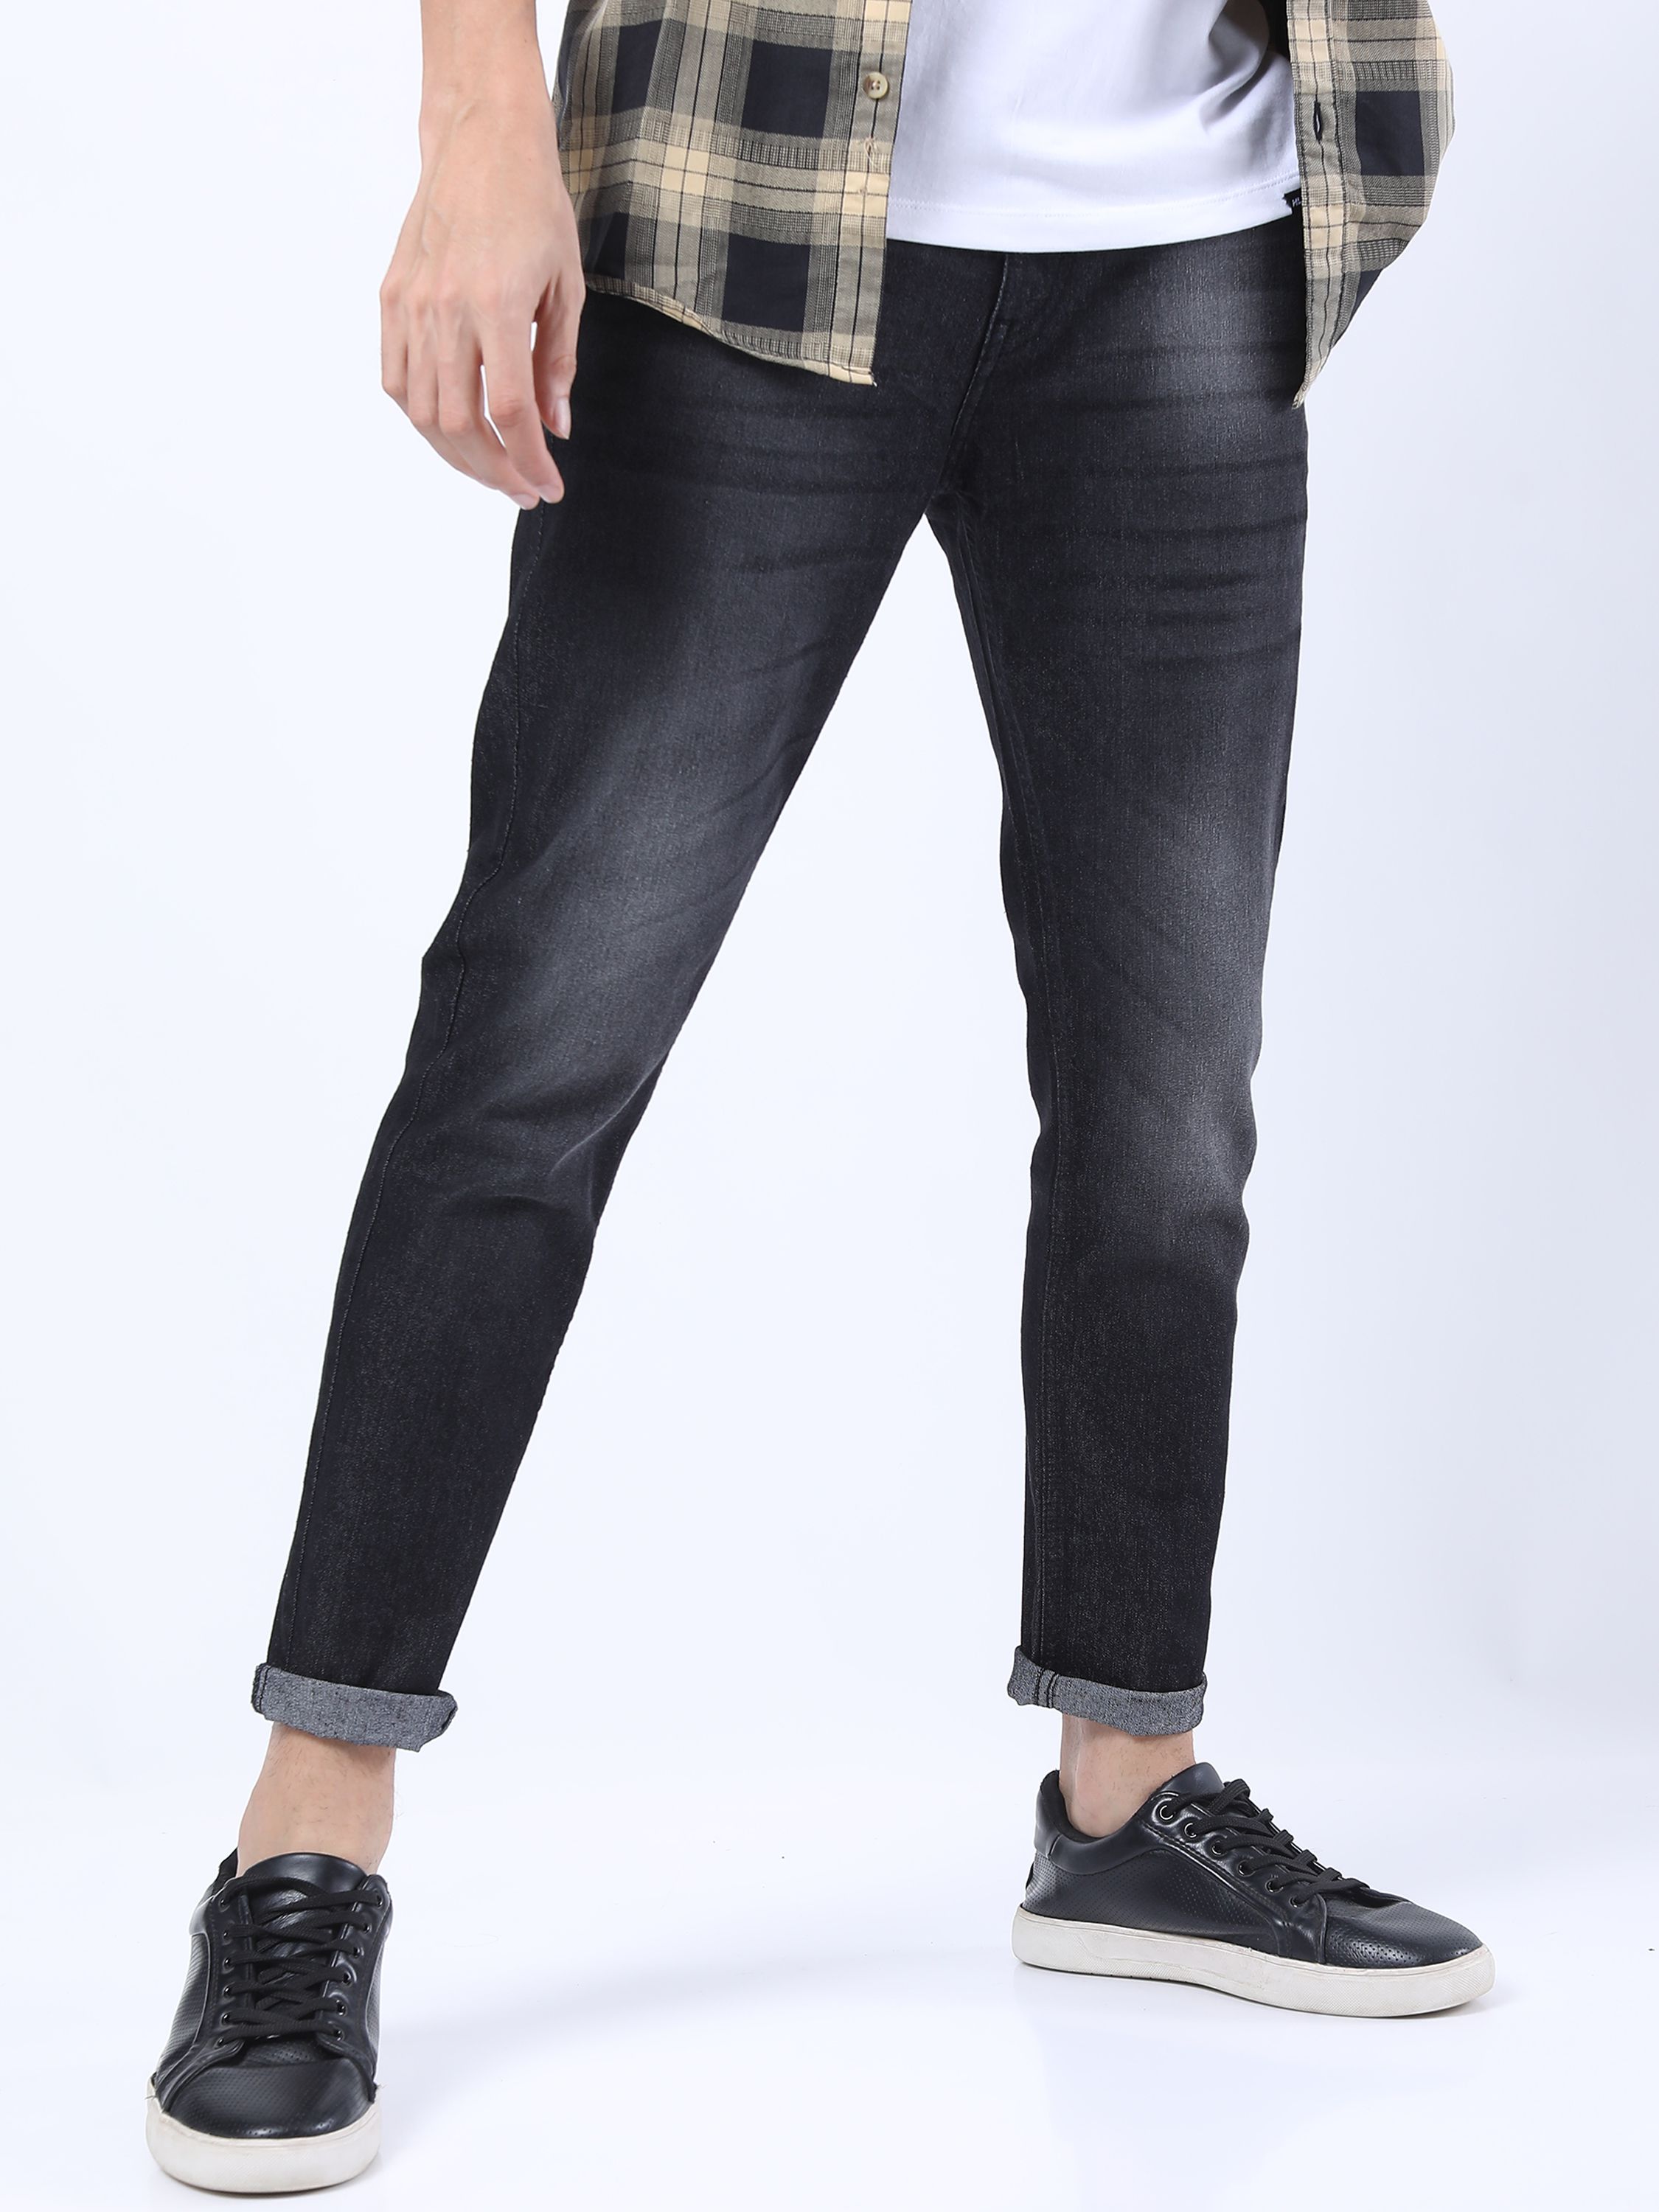     			Ketch Slim Fit Faded Men's Jeans - Charcoal ( Pack of 1 )